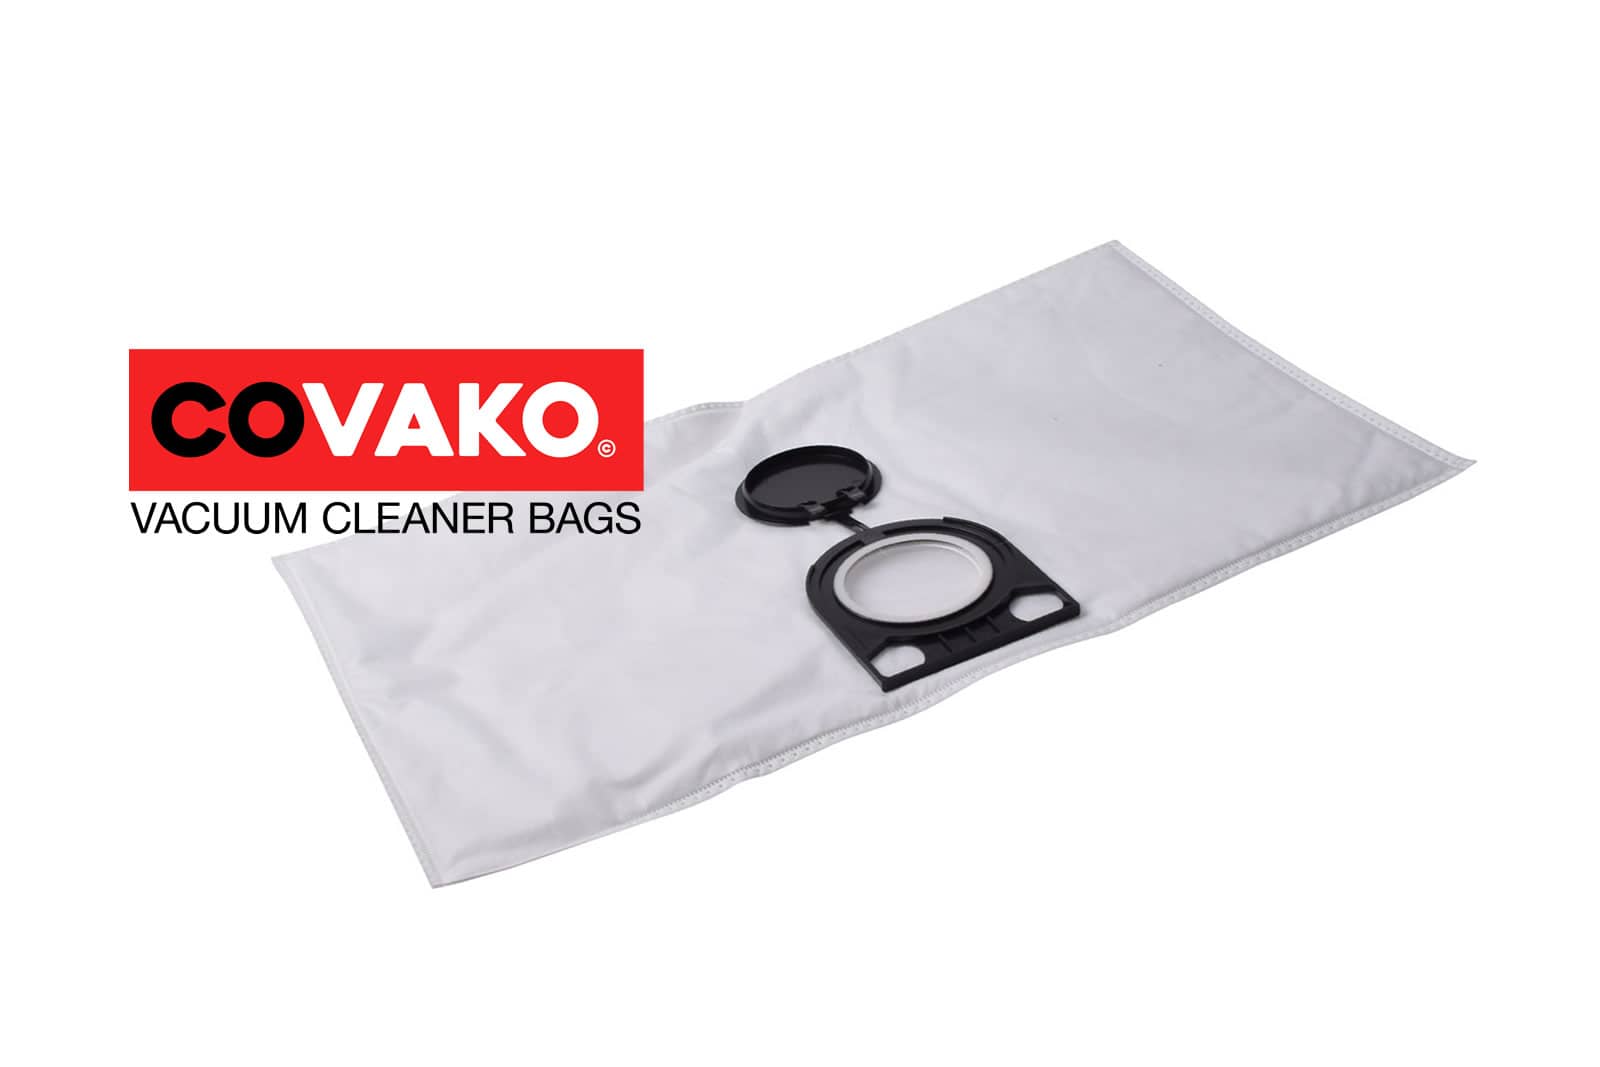 Electrostar uClean 1420 HK / Synthesis - Electrostar vacuum cleaner bags